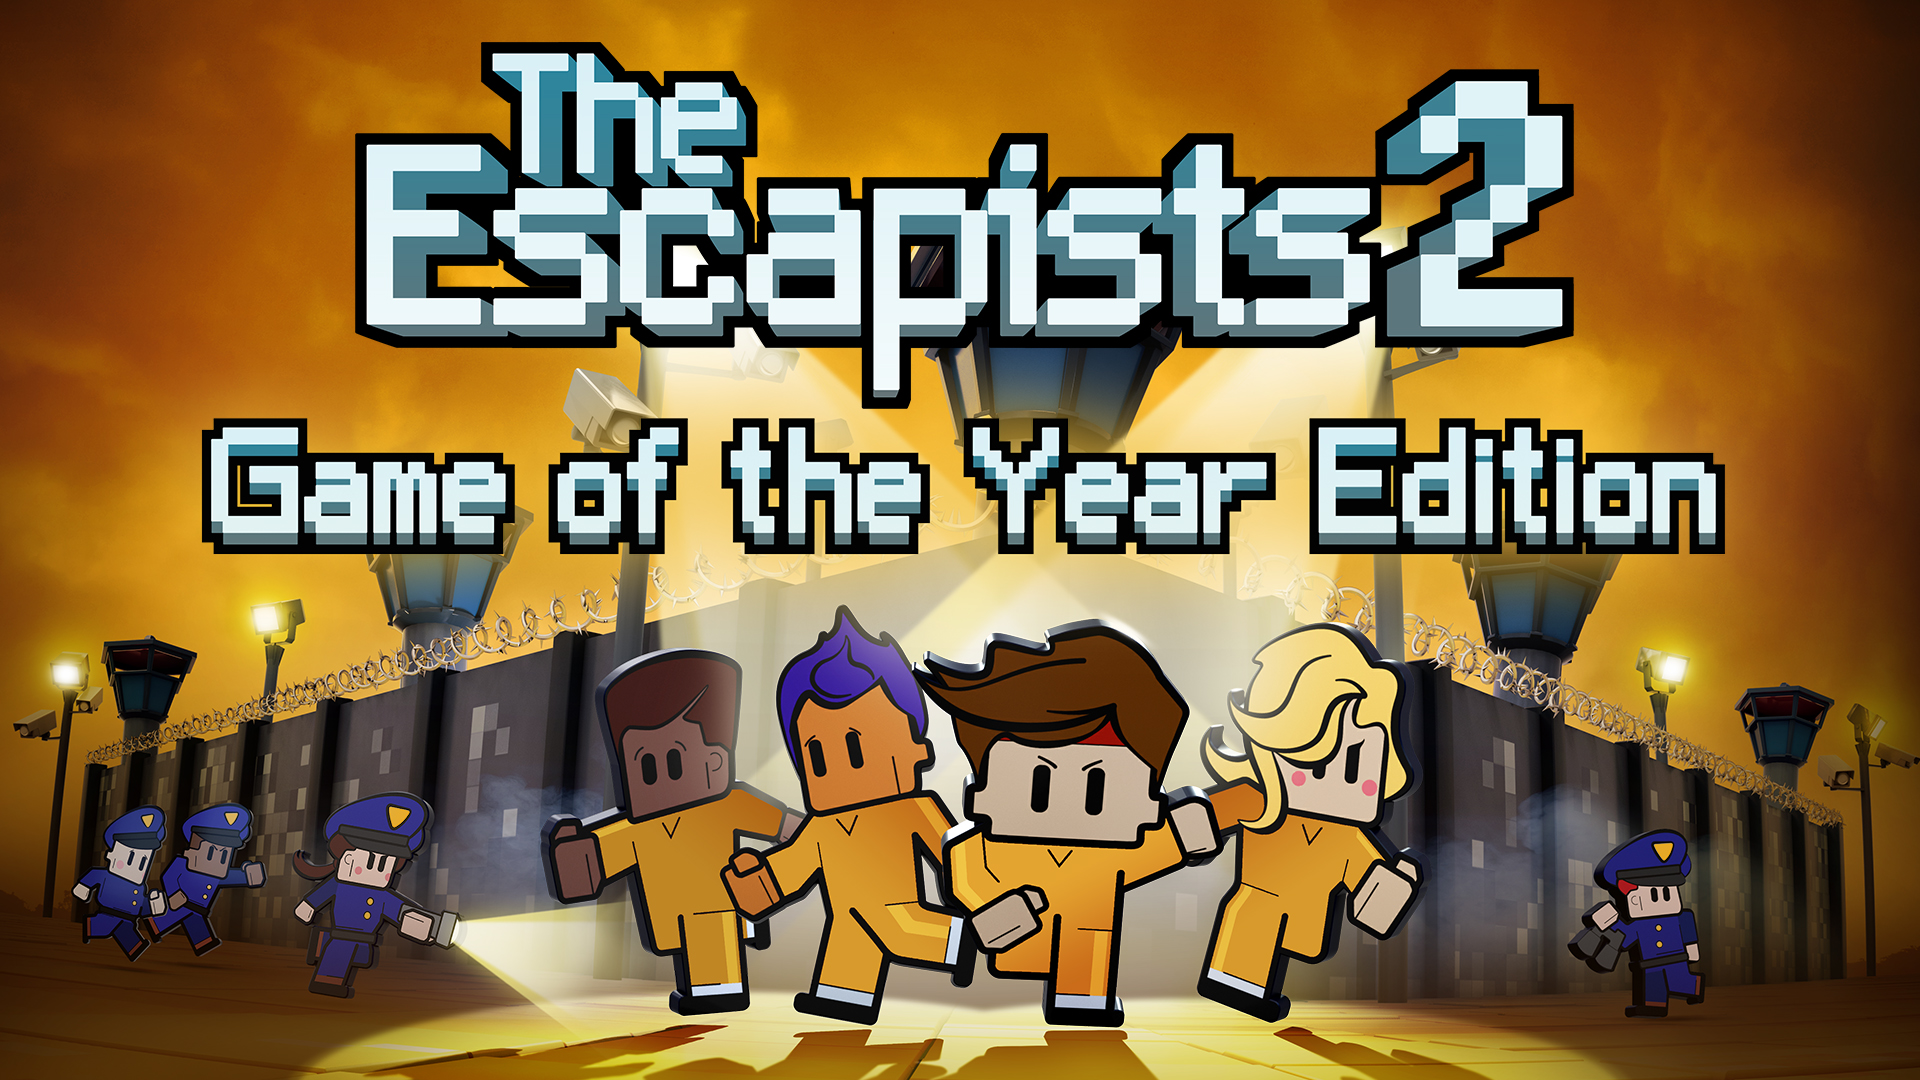 download the escapists 2 ps4